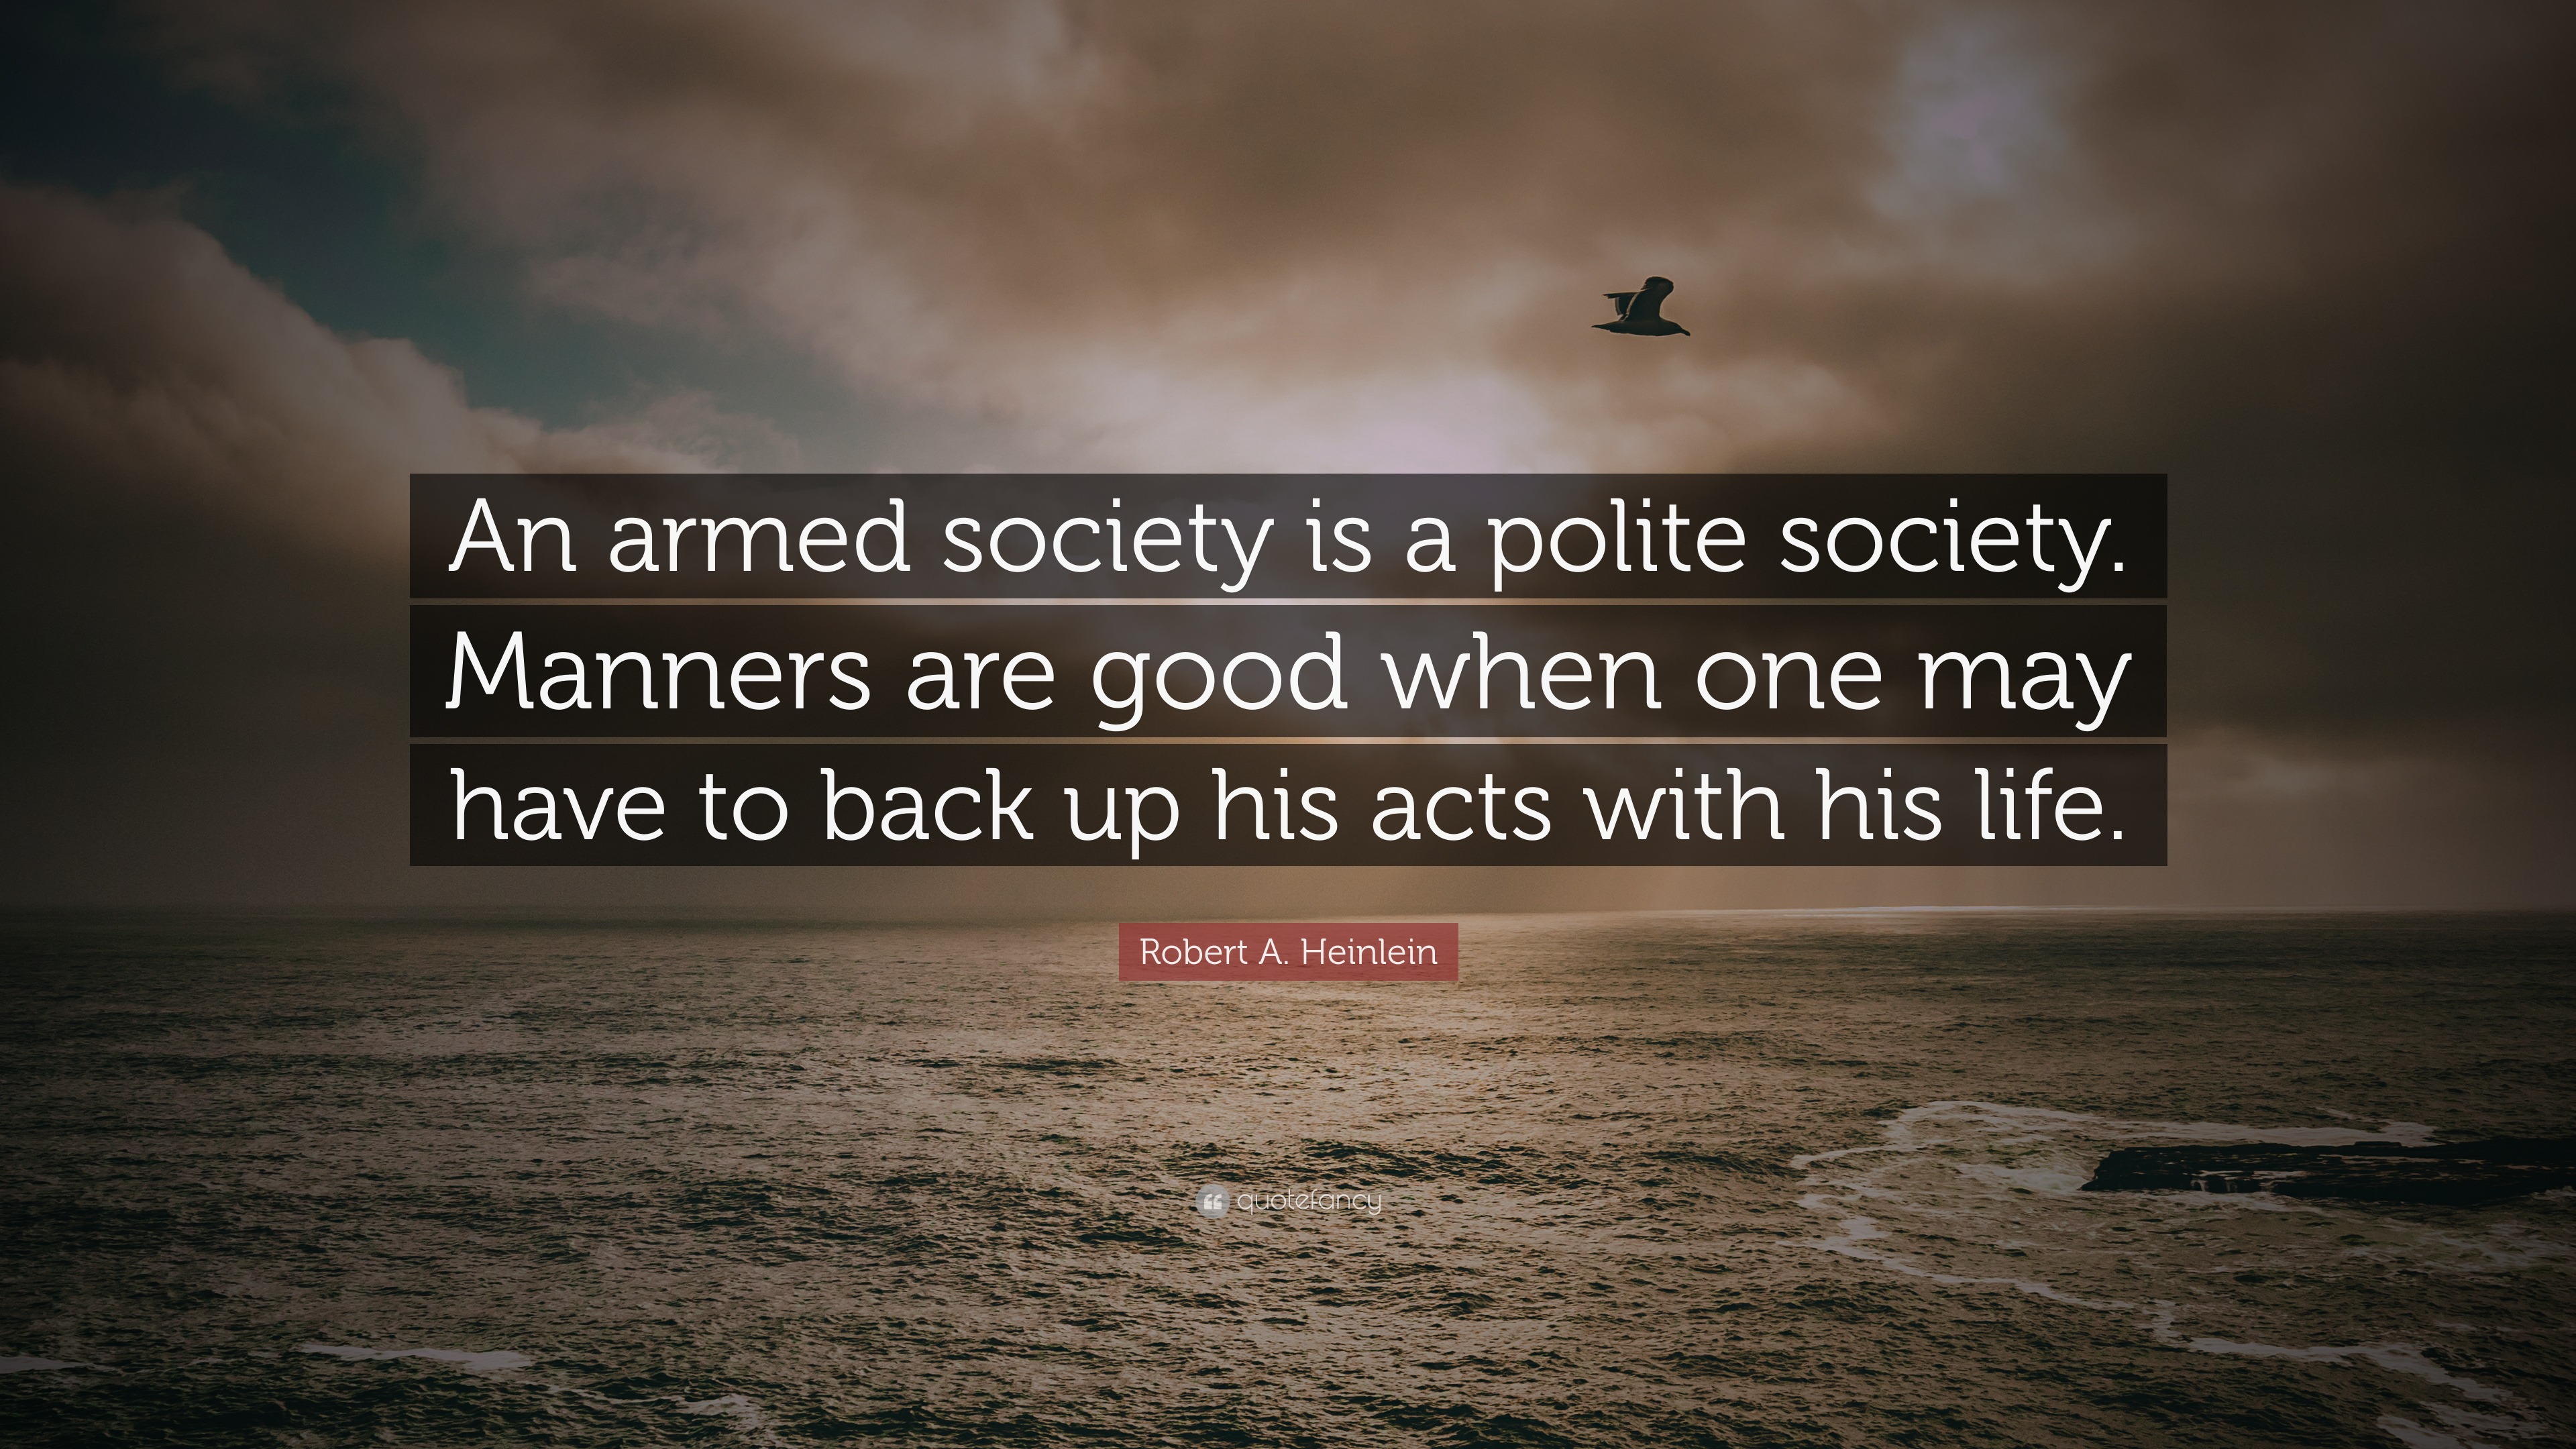 2178919-Robert-A-Heinlein-Quote-An-armed-society-is-a-polite-society.jpg